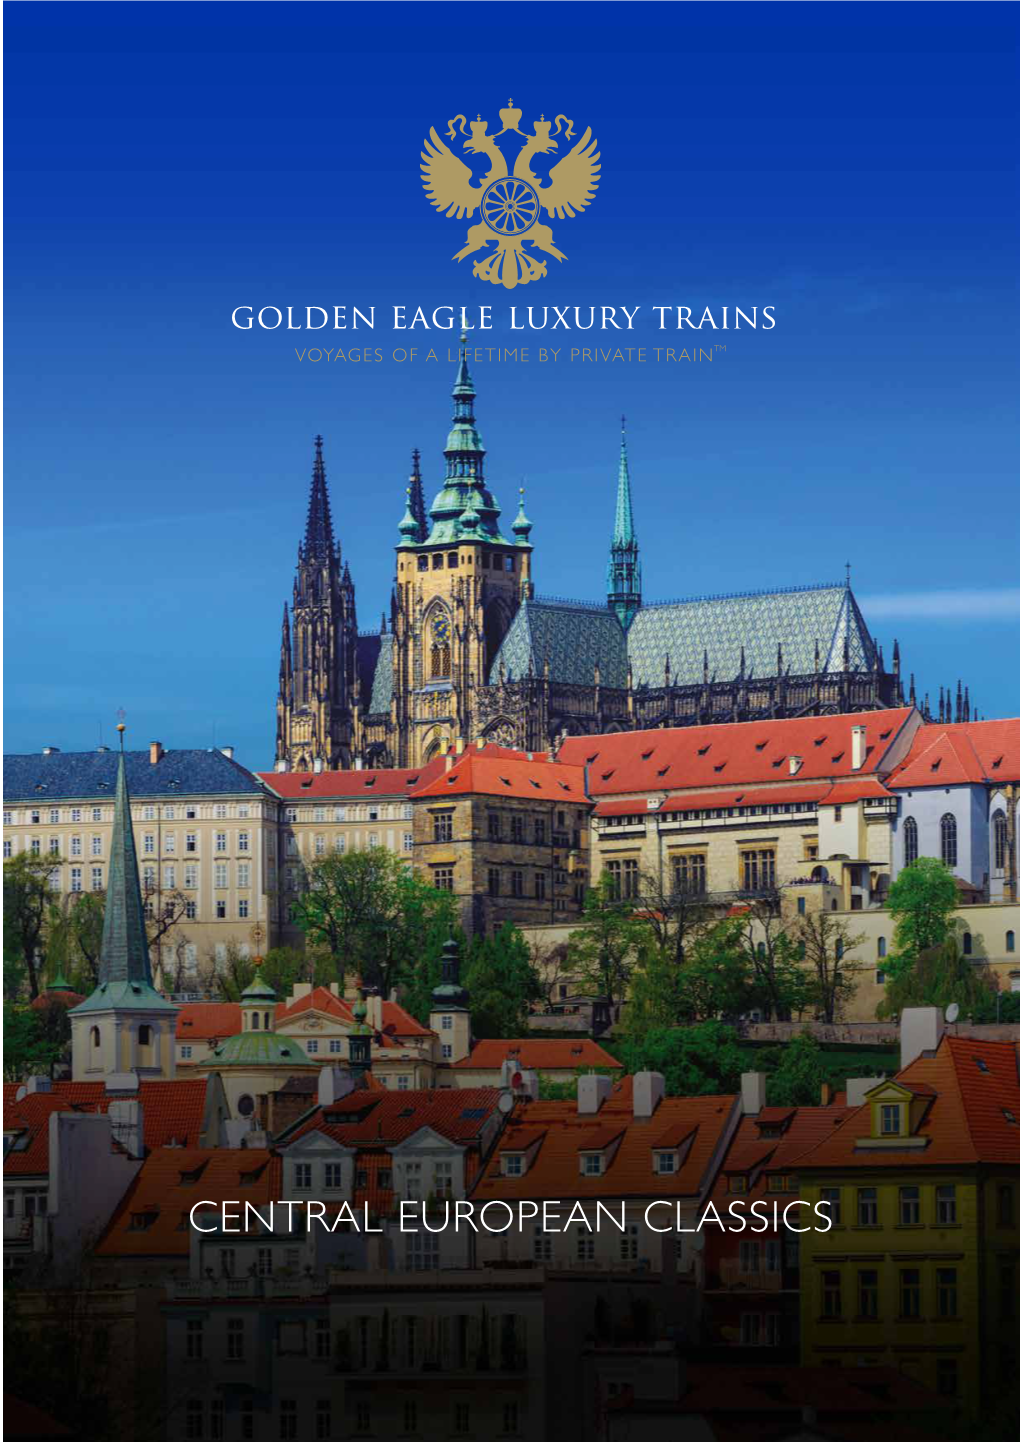 CENTRAL EUROPEAN CLASSICS Cover Photo: Lake Bled, Slovenia 2 to Book Call +44 (0)161 928 9410 Or Call Your Travel Agent Golden Eagle Danube Express